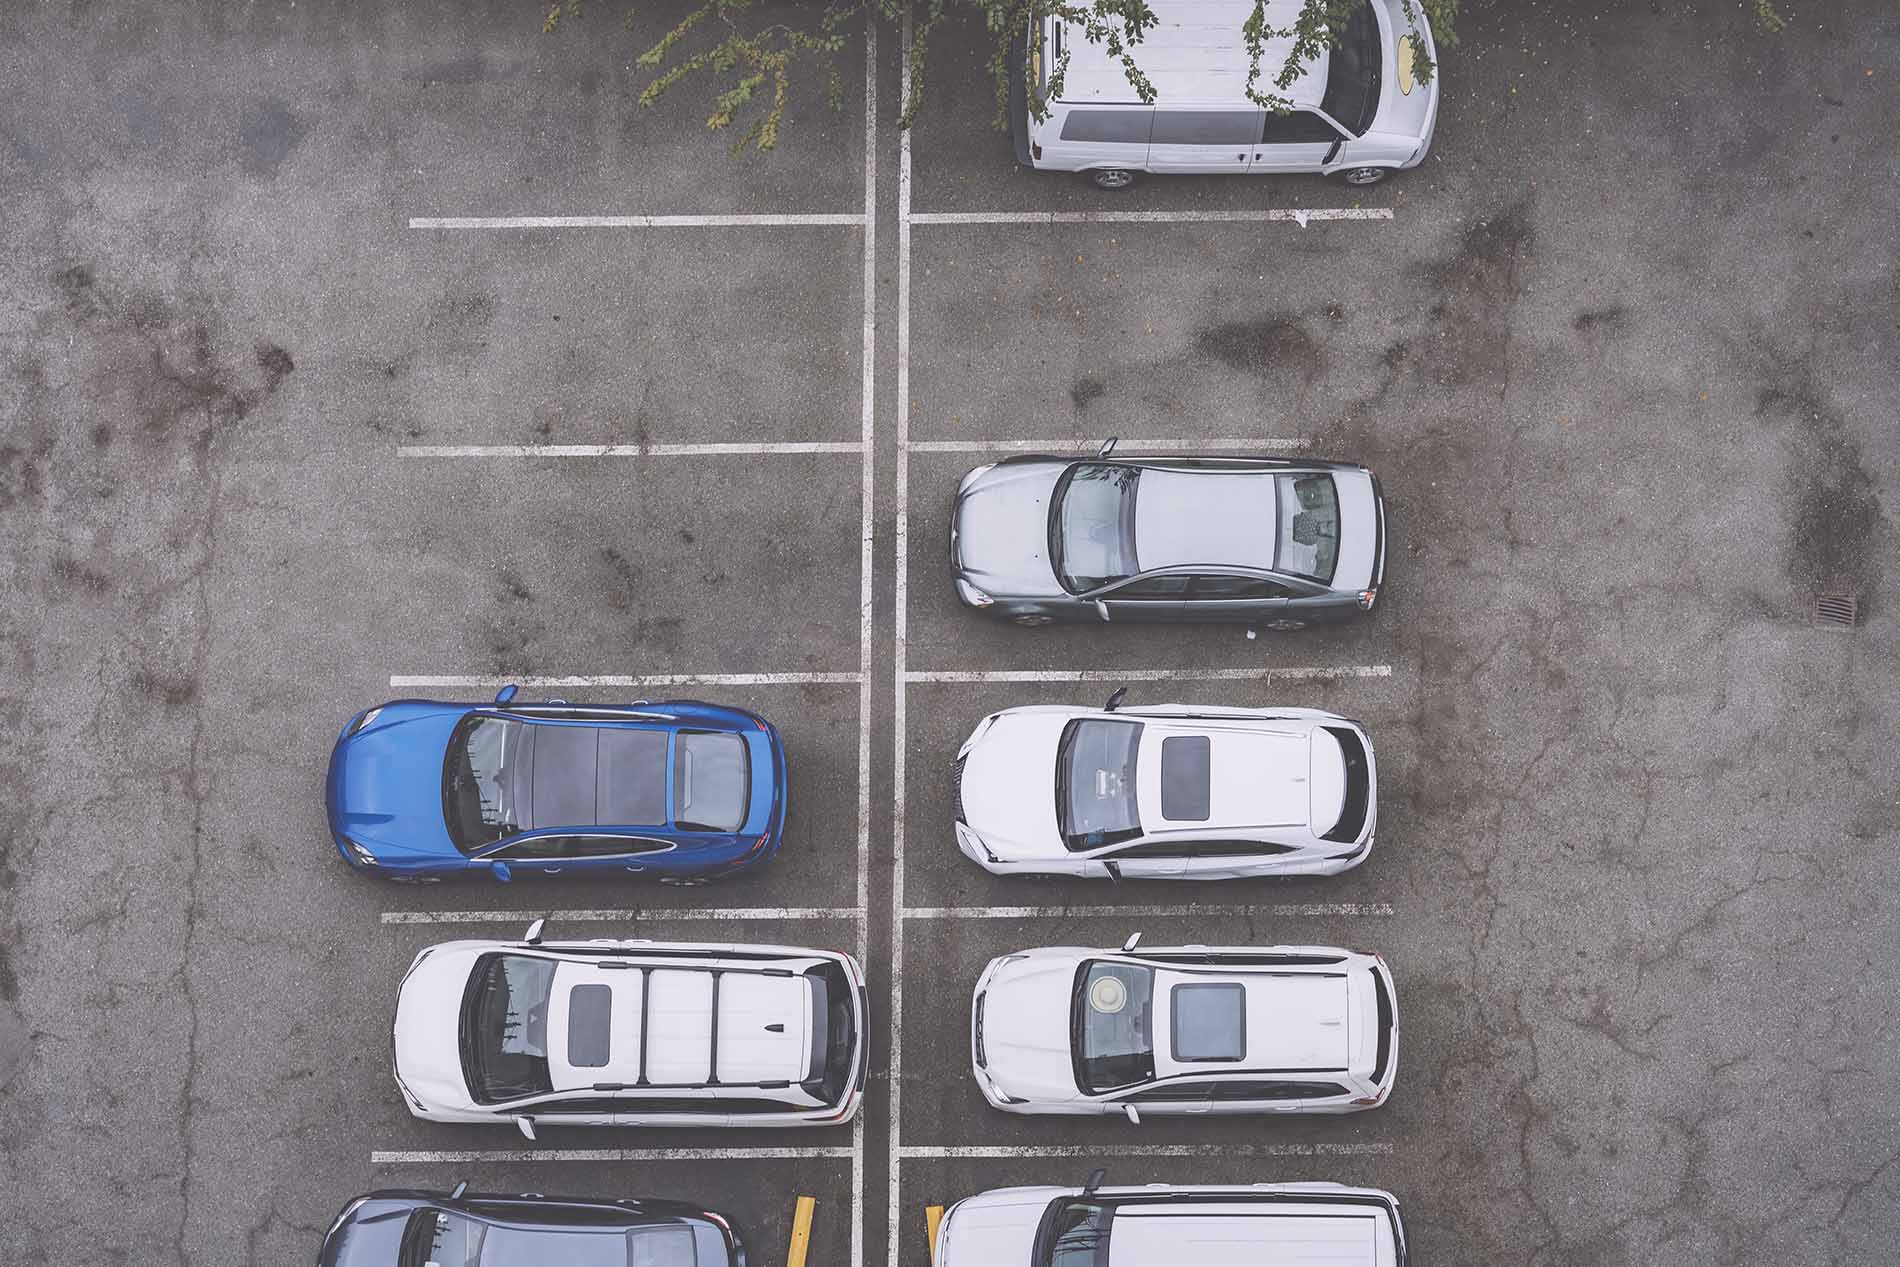 When Do Parking Lots Pass the Situs Test?